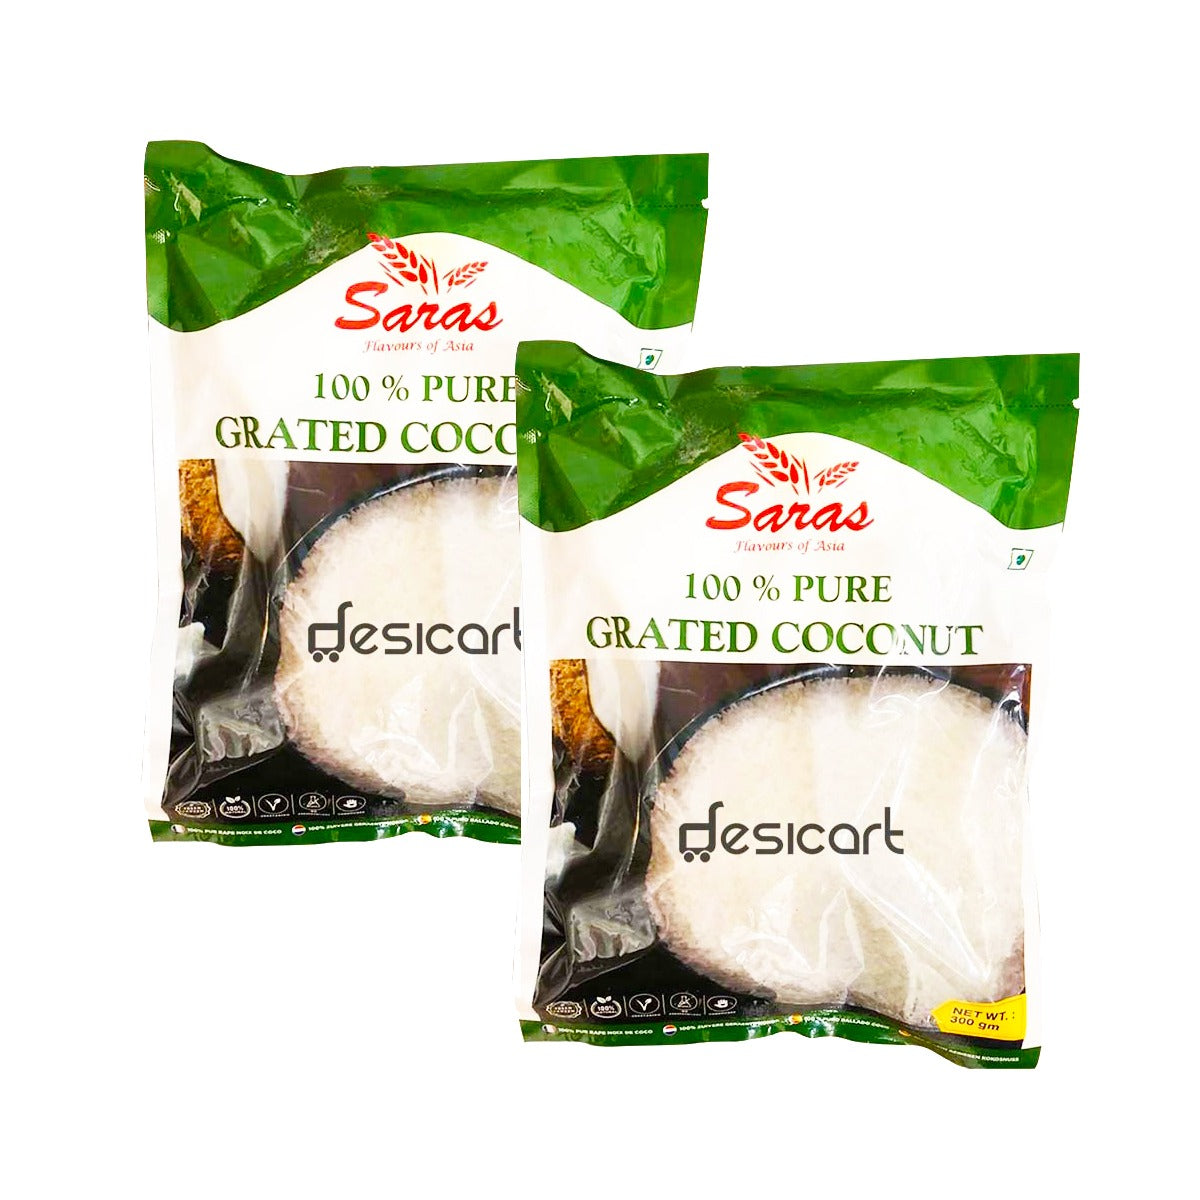 Saras Grated Coconut 300g Pack of 2